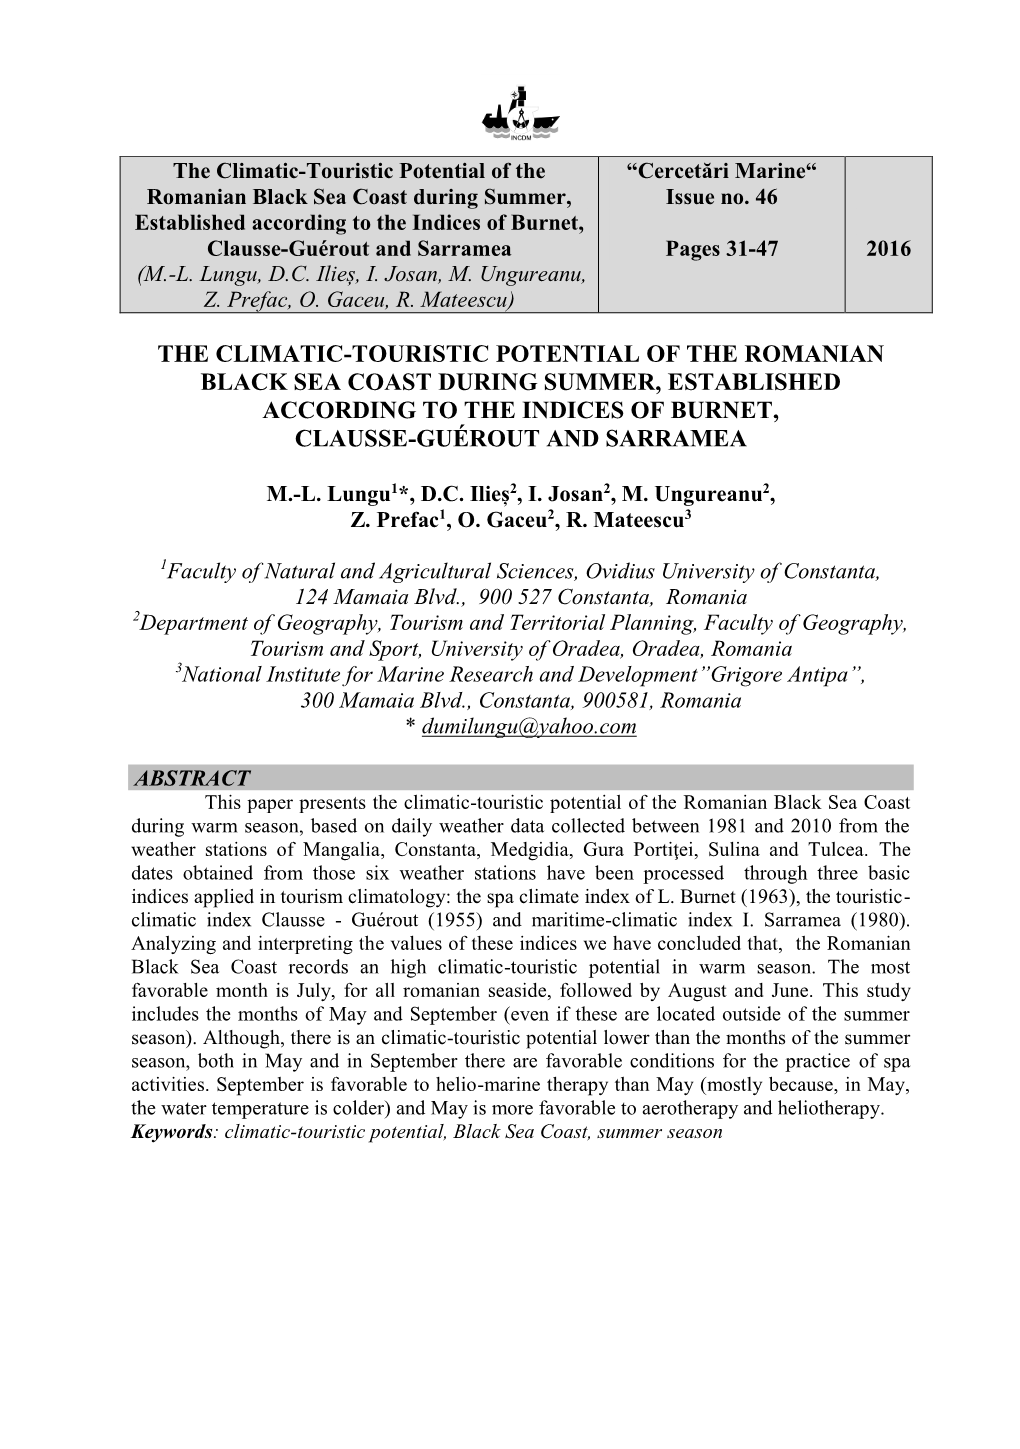 The Climatic-Touristic Potential of the Romanian Black Sea Coast During Summer, Established According to the Indices of Burnet, Clausse-Guérout and Sarramea